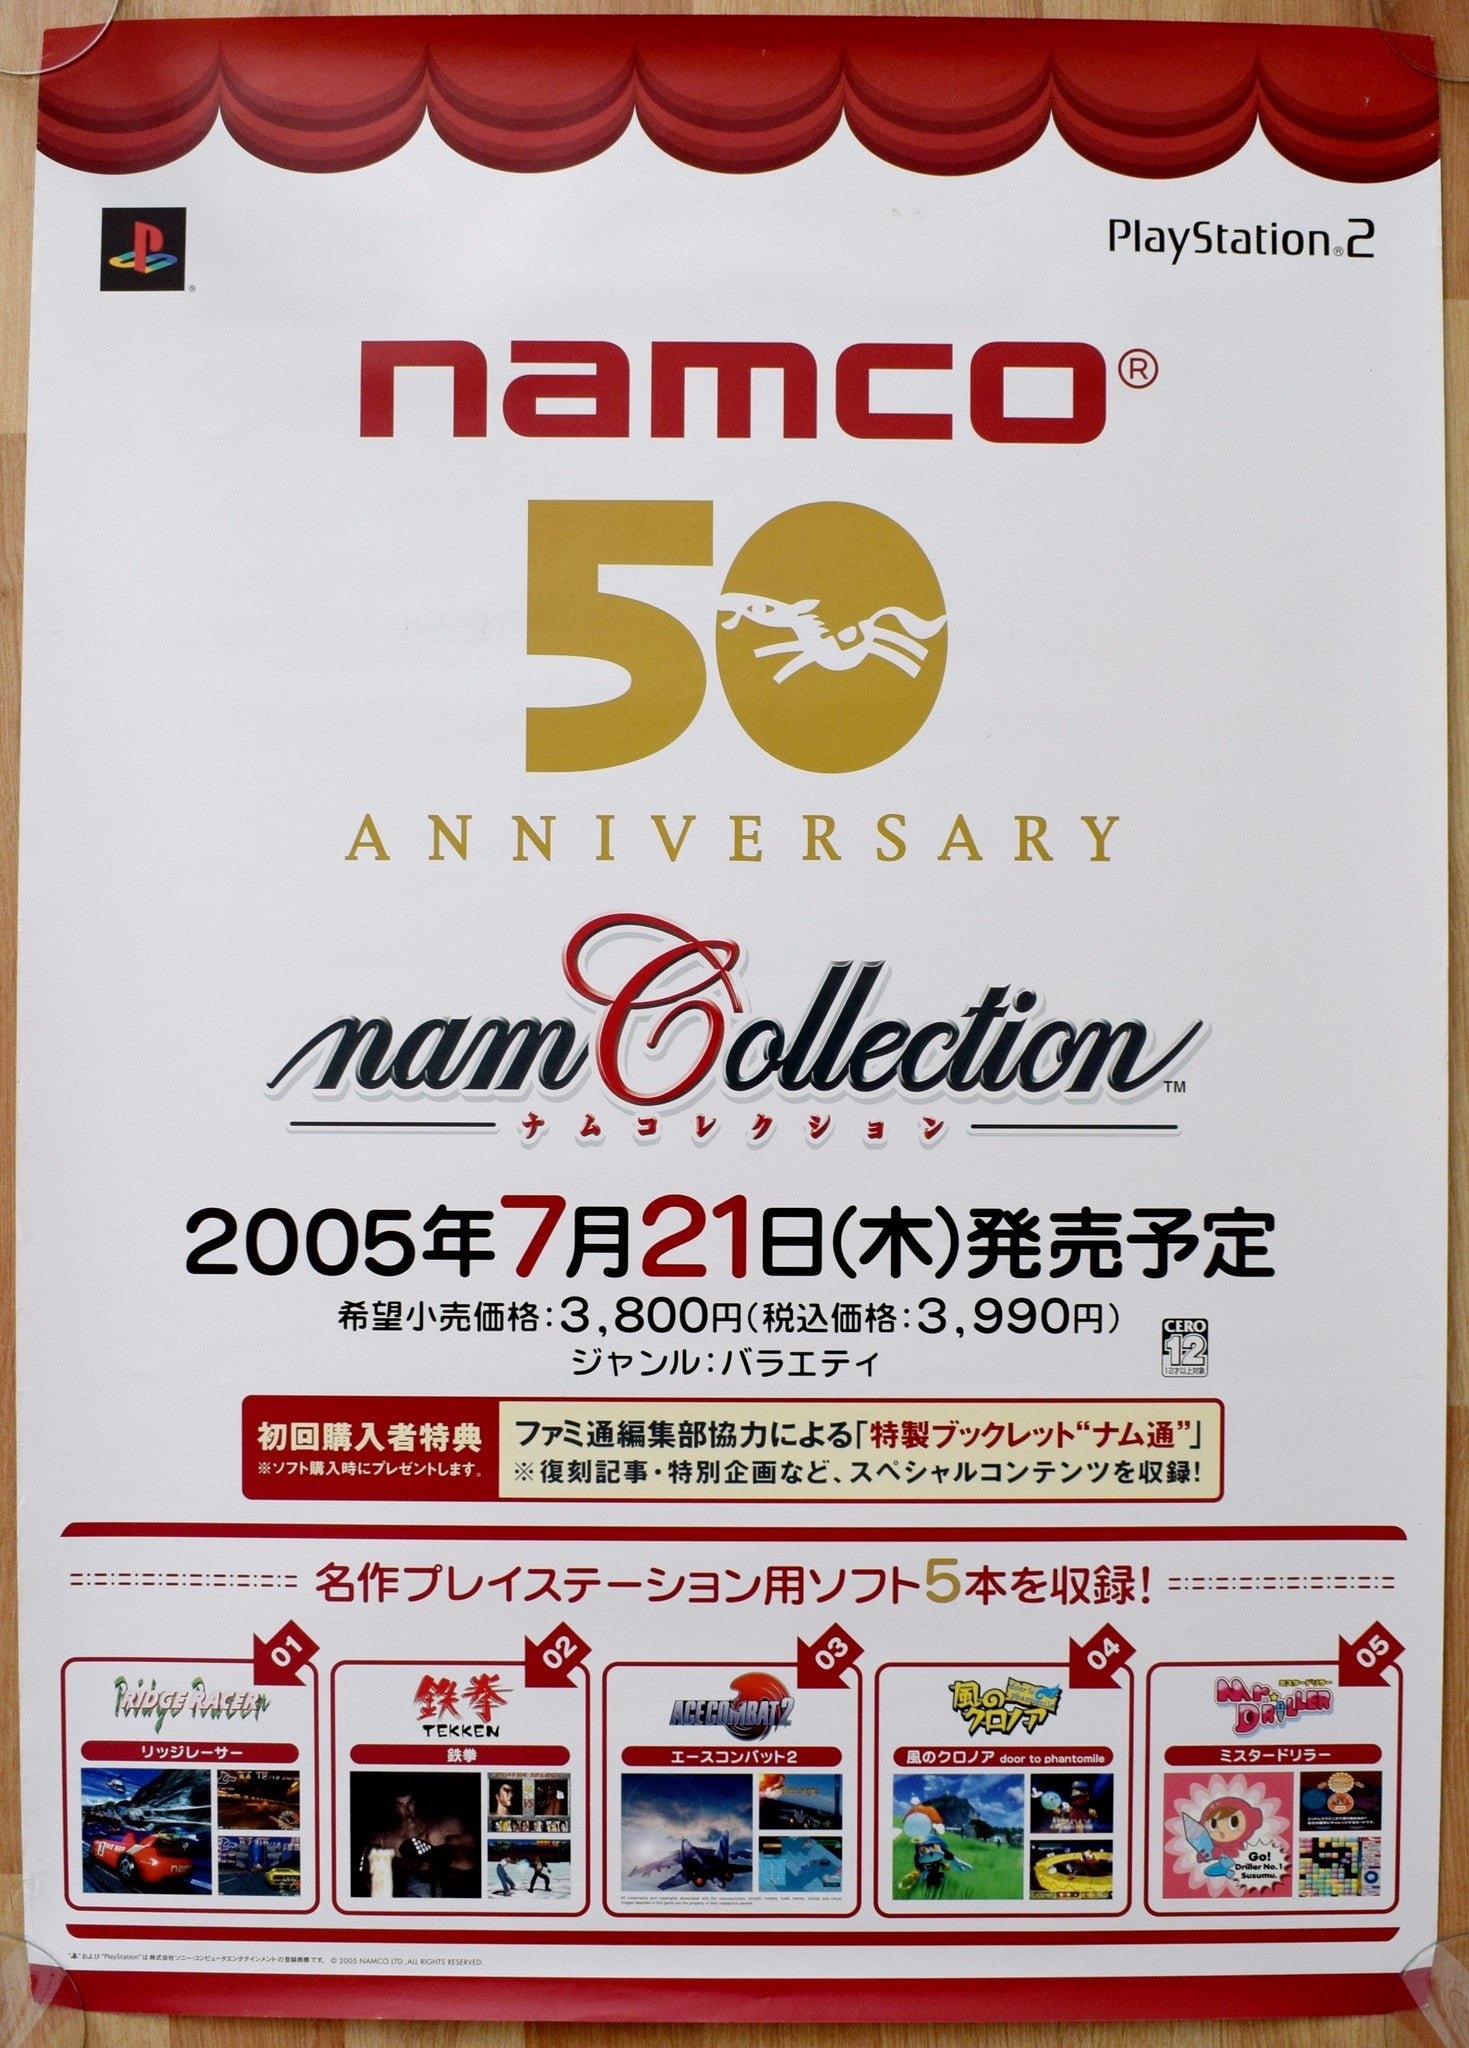 Namco 50th Anniversary (B2) Japanese Promotional Poster